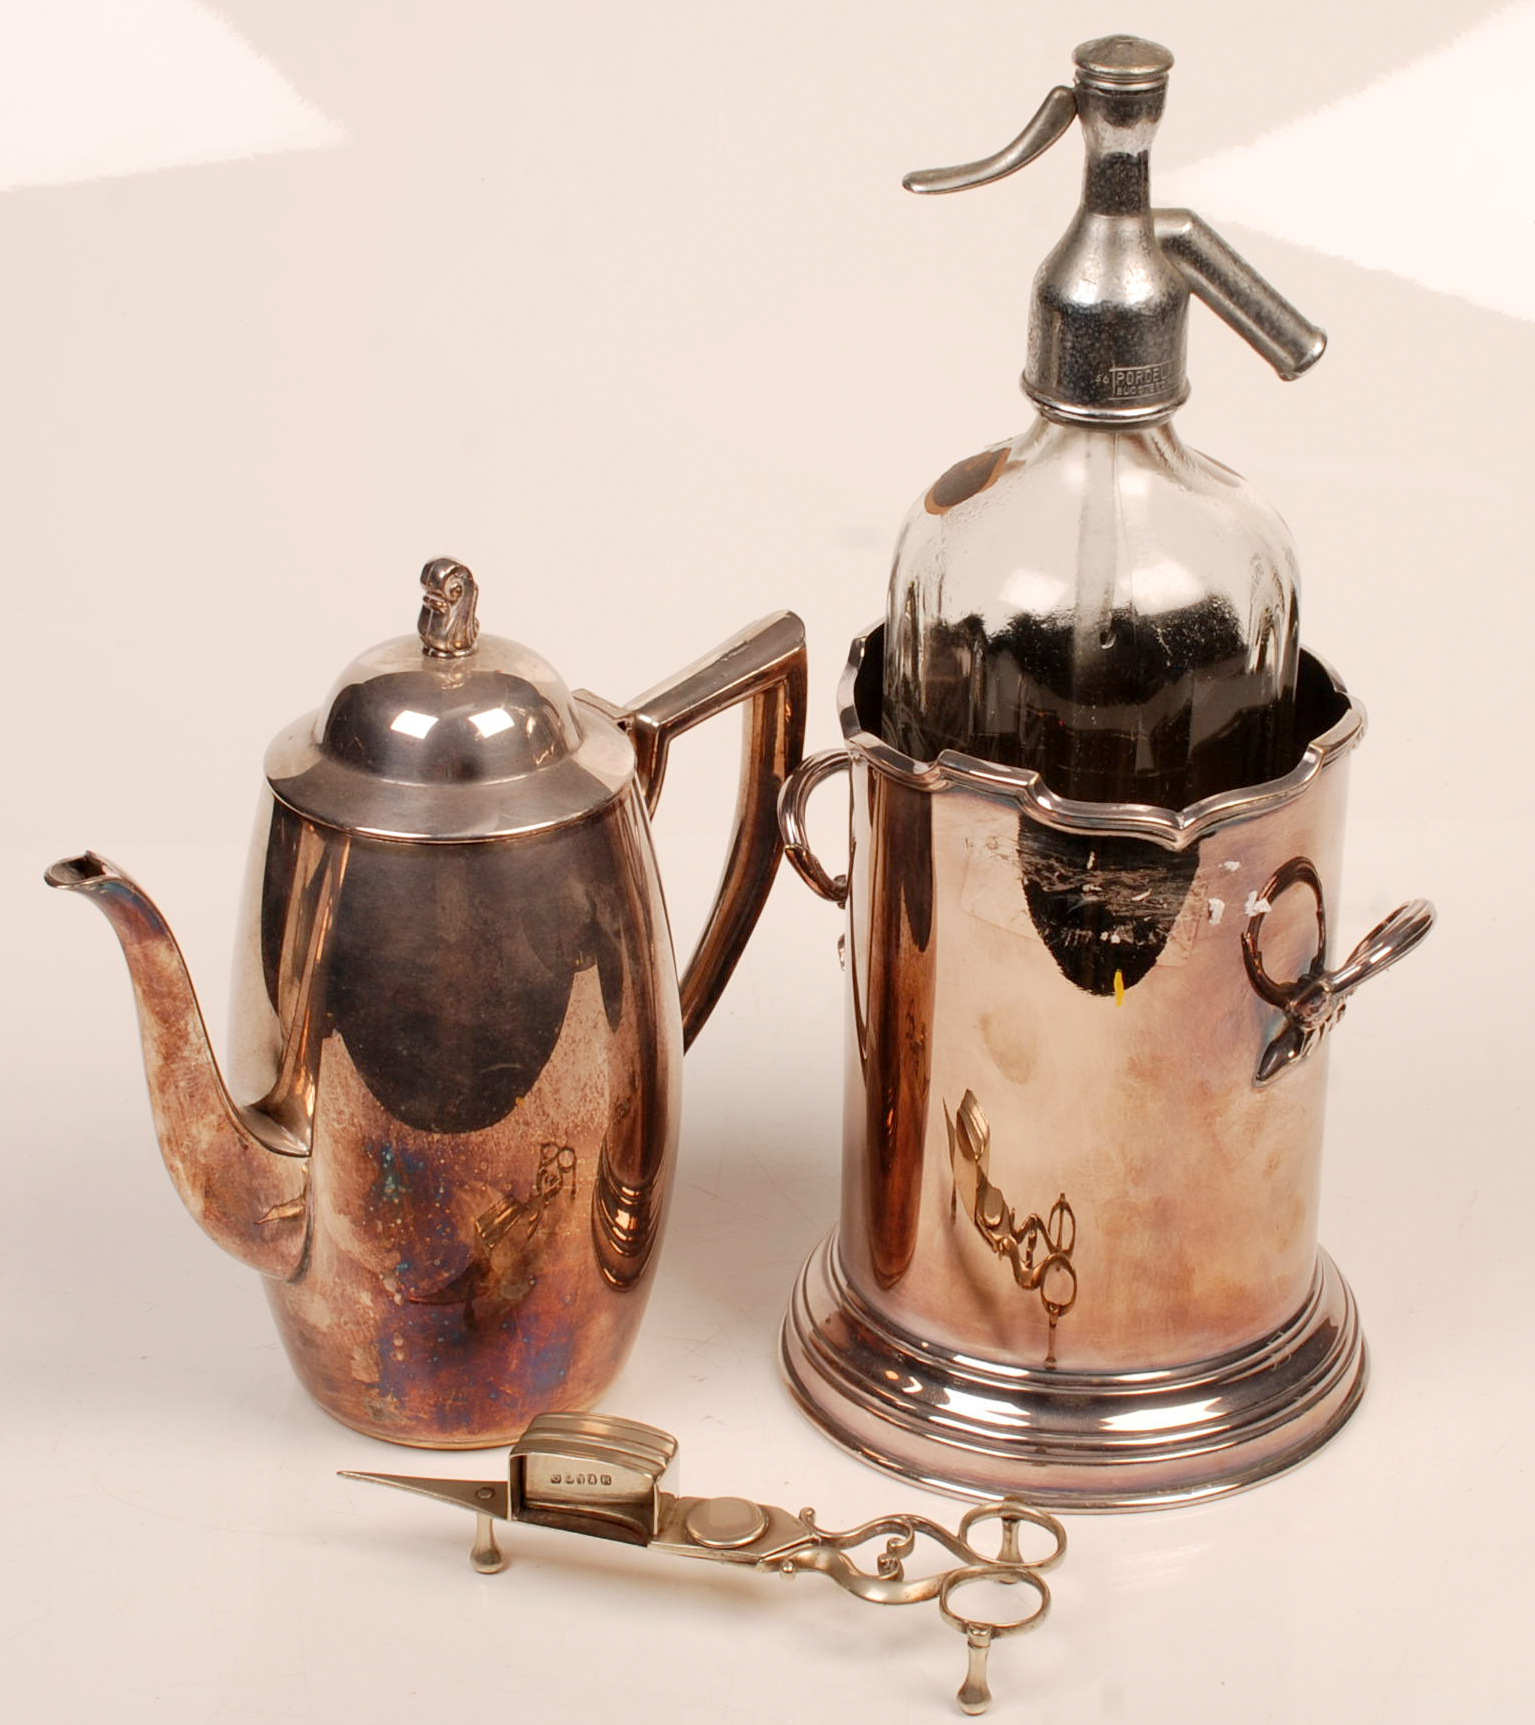 A soda syphon stand by John Pound & Co. with cast handles, a jug with a cast finial and a pair of